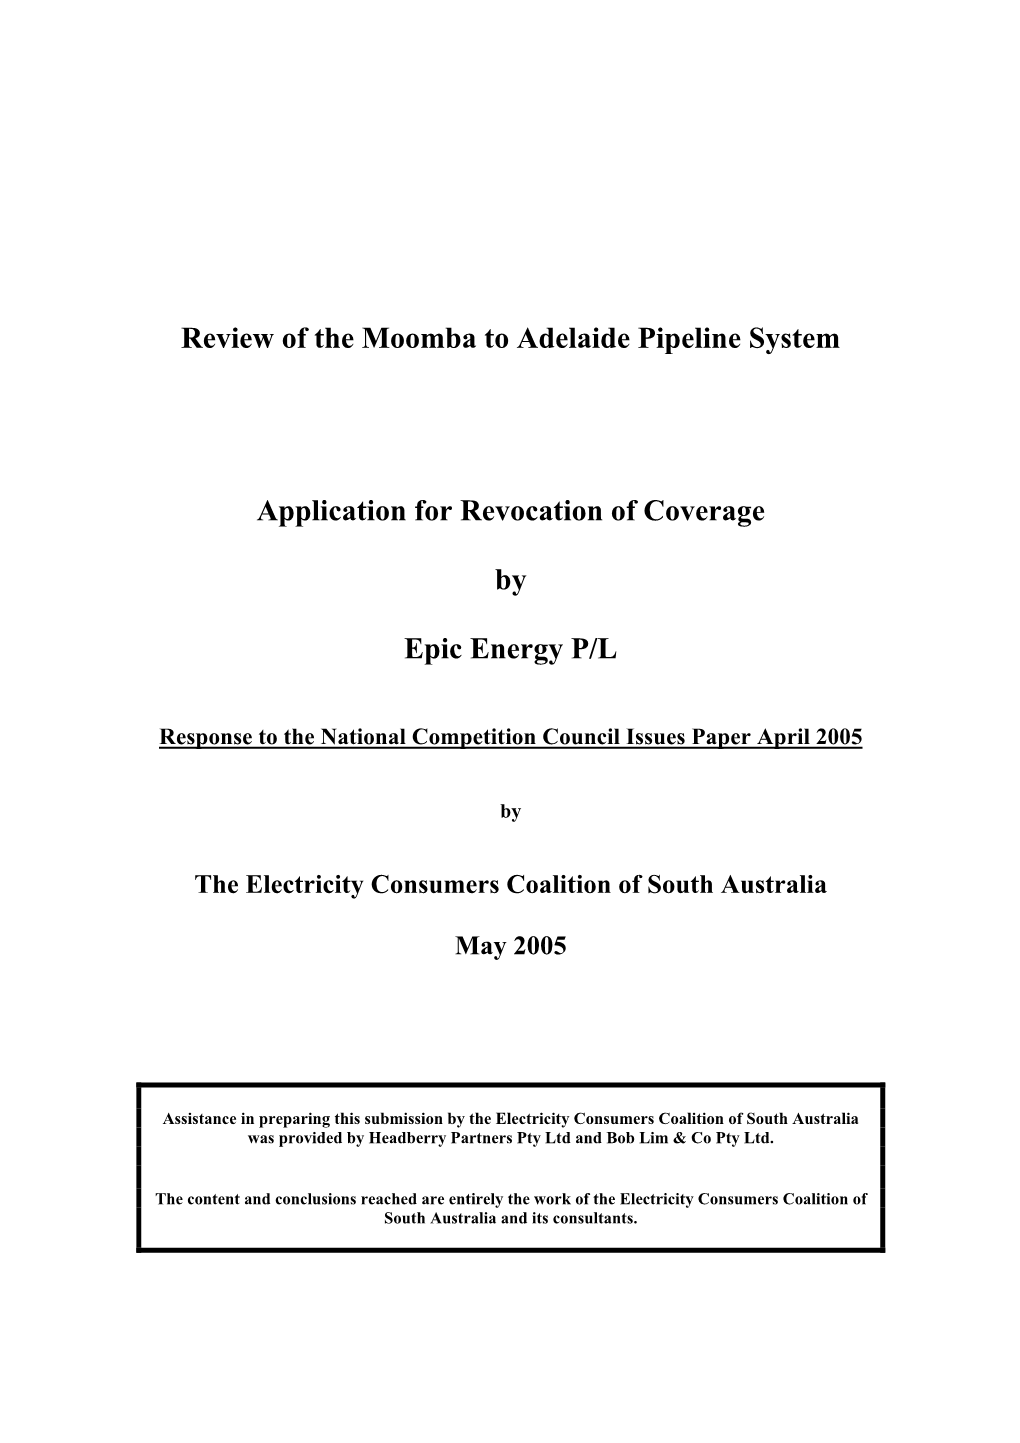 Application for Revocation of Coverage of the Moomba to Adelaide Gas